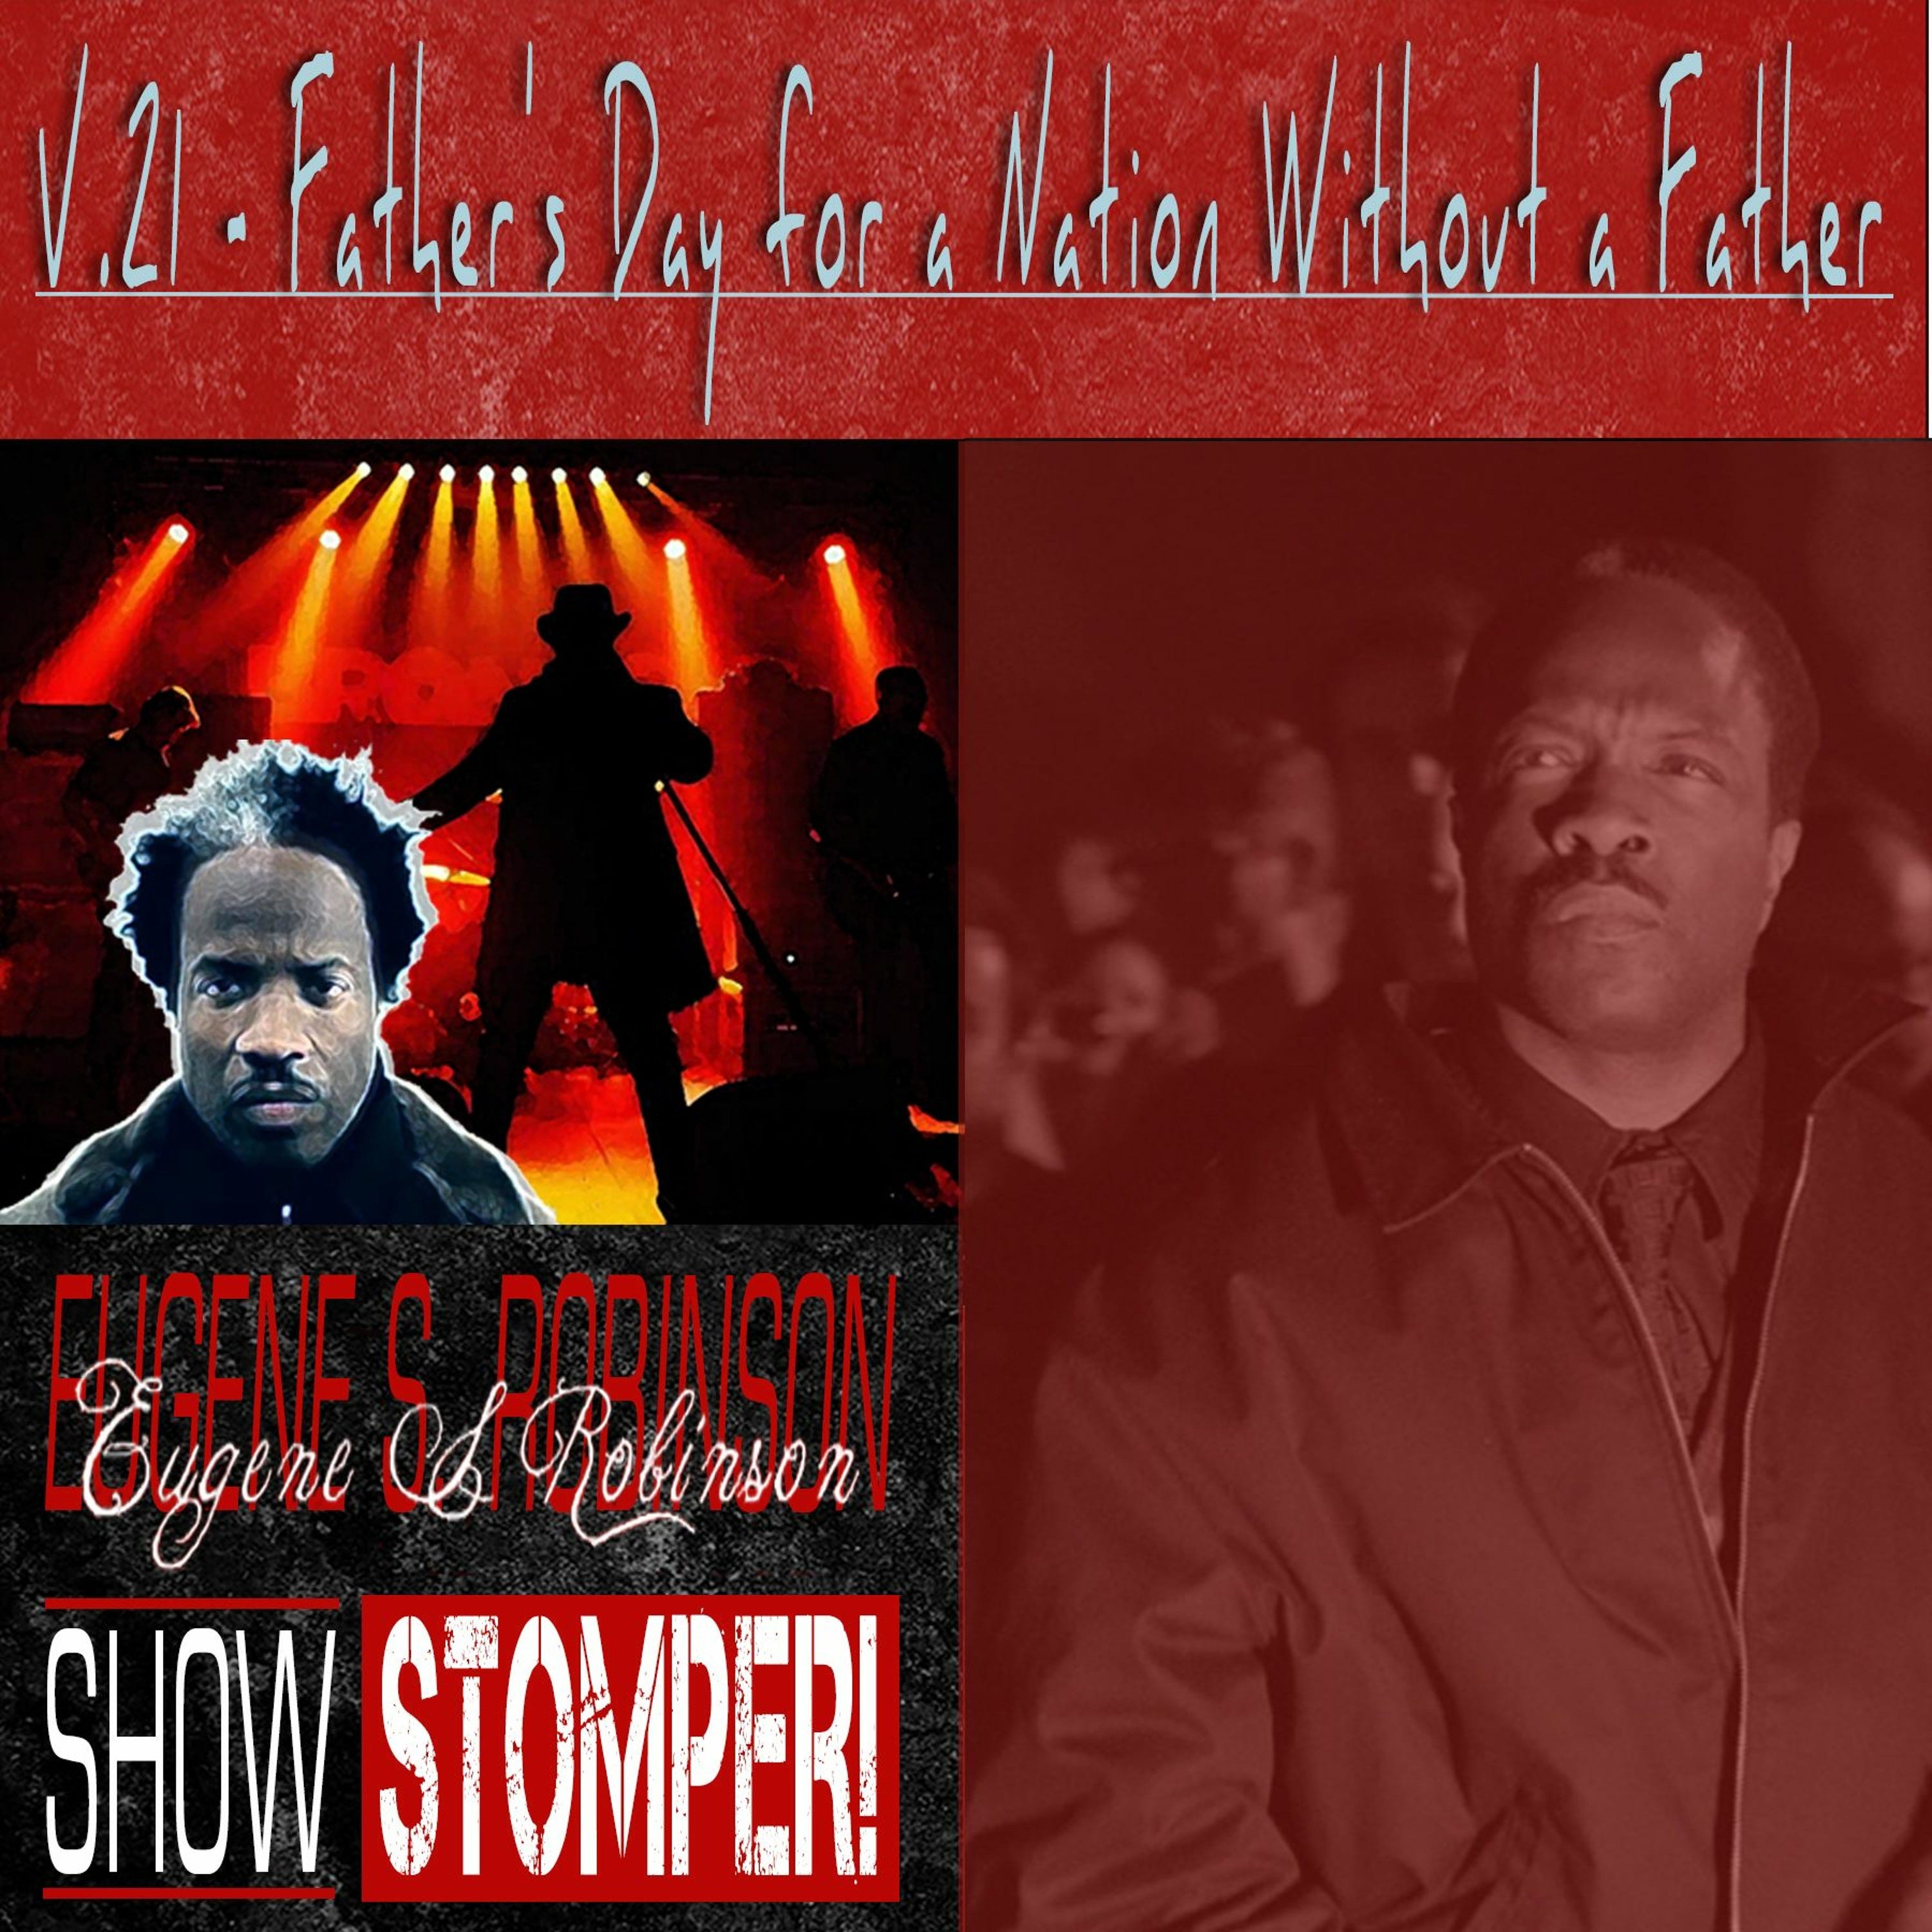 The Eugene S. Robinson Show Stomper! V.21 - Father's Day For A Nation Without A Father